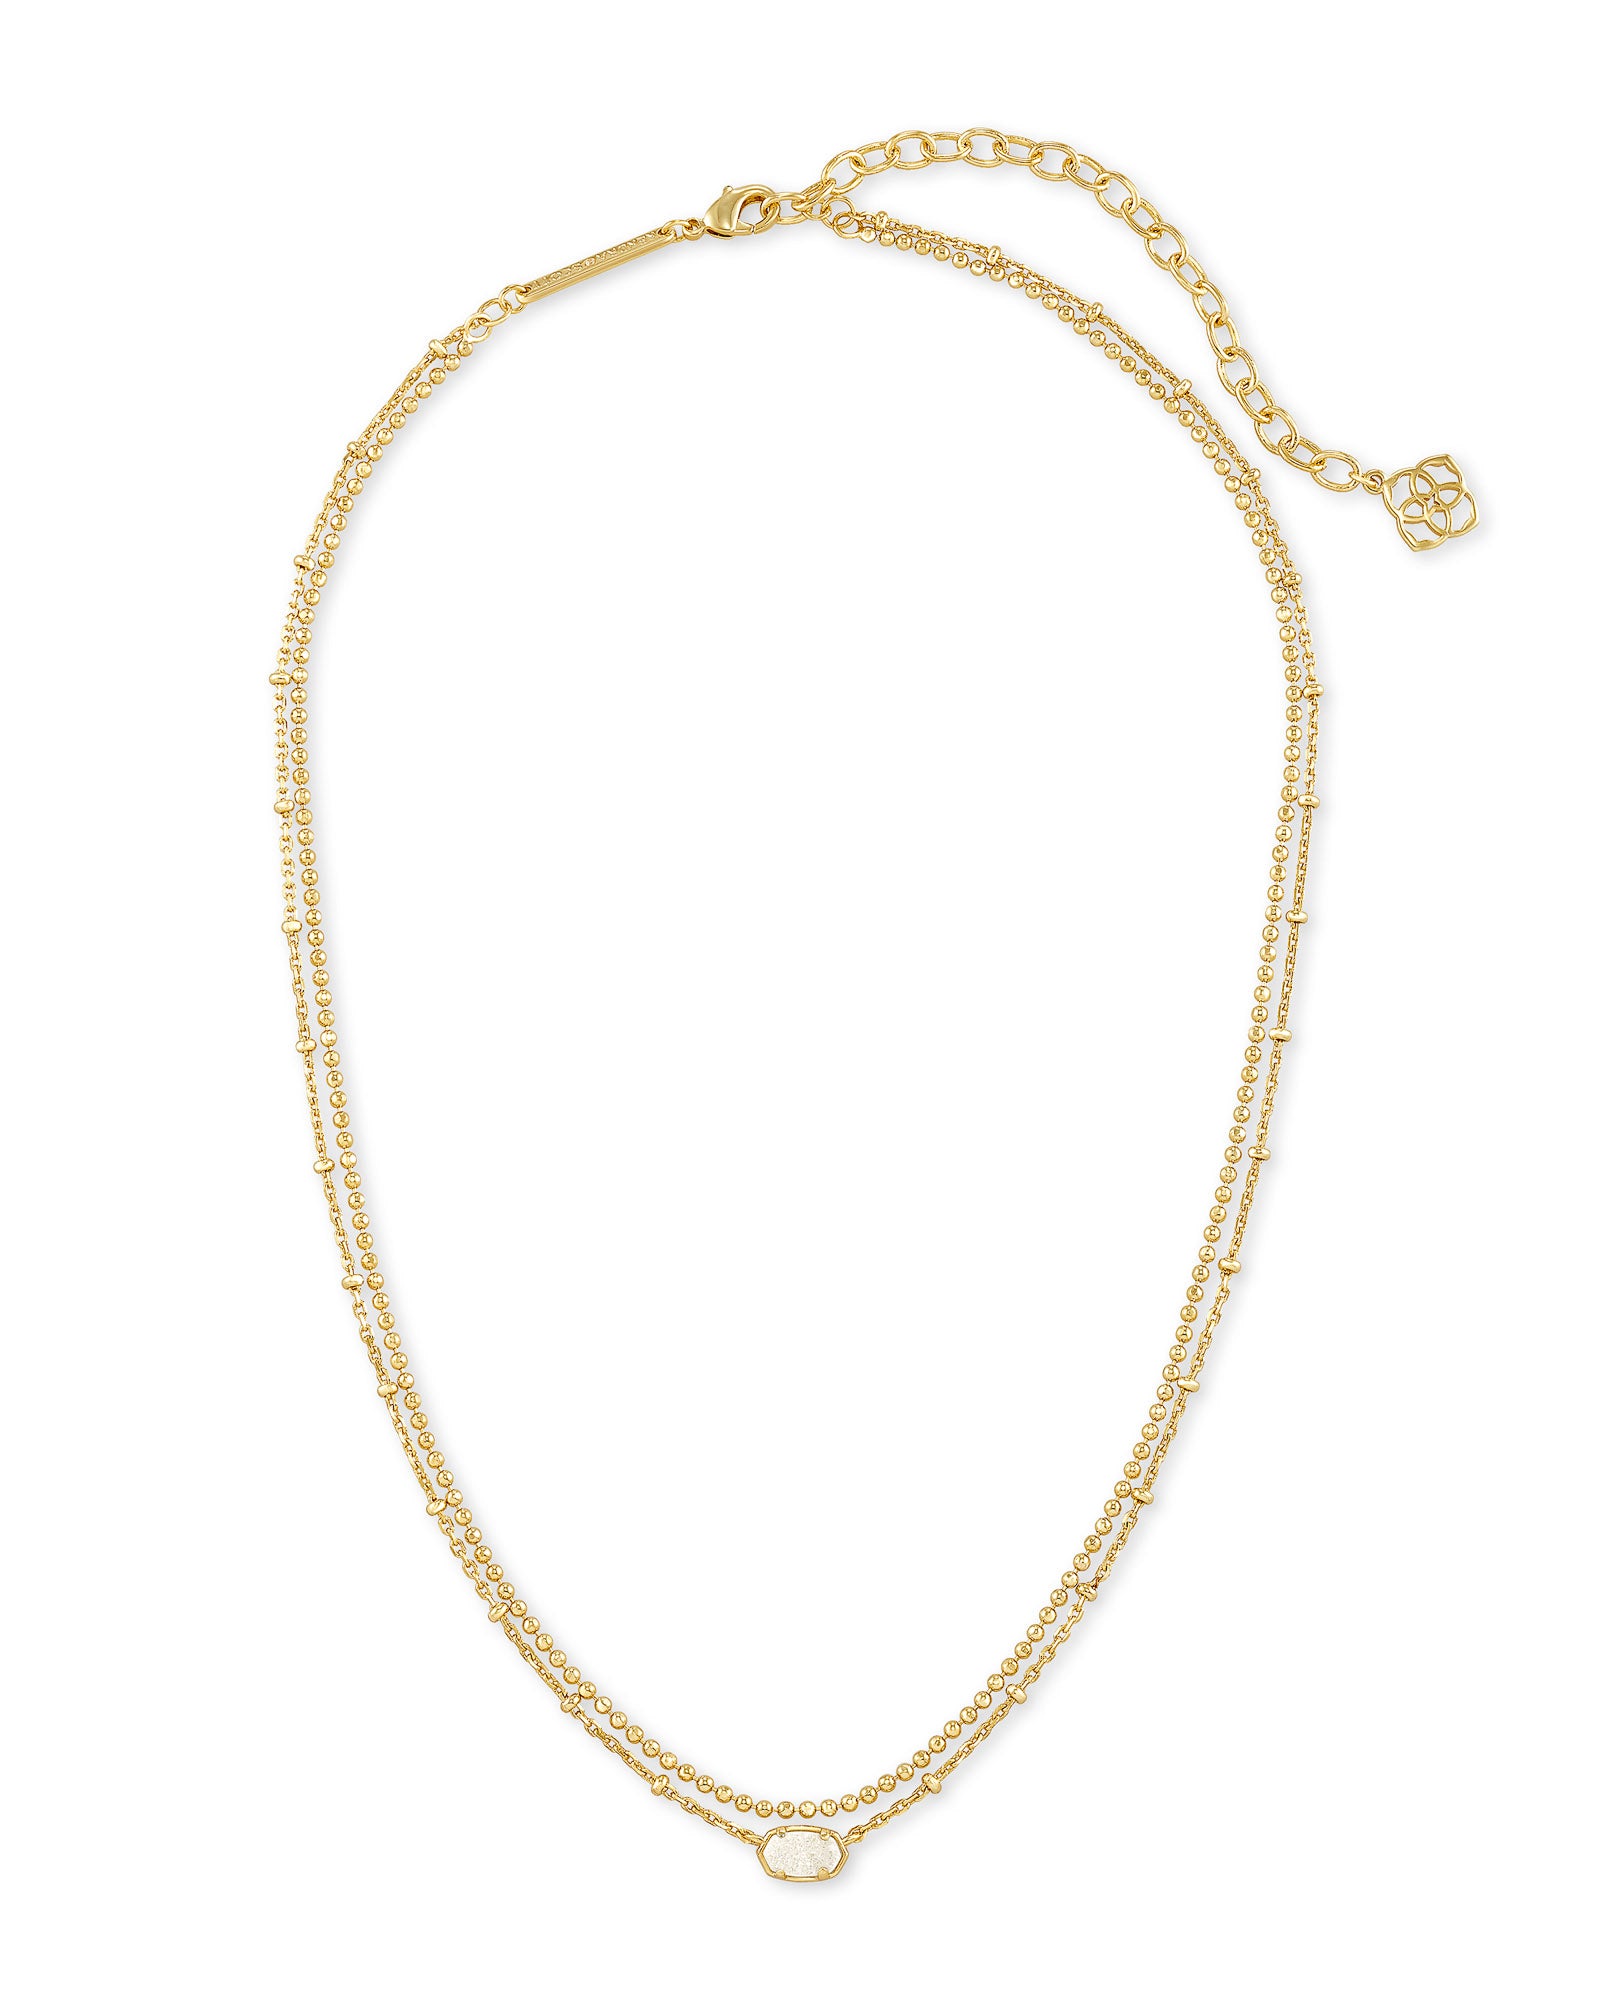 Emilie Multi Strand Necklace in Gold Iridescent Drusy